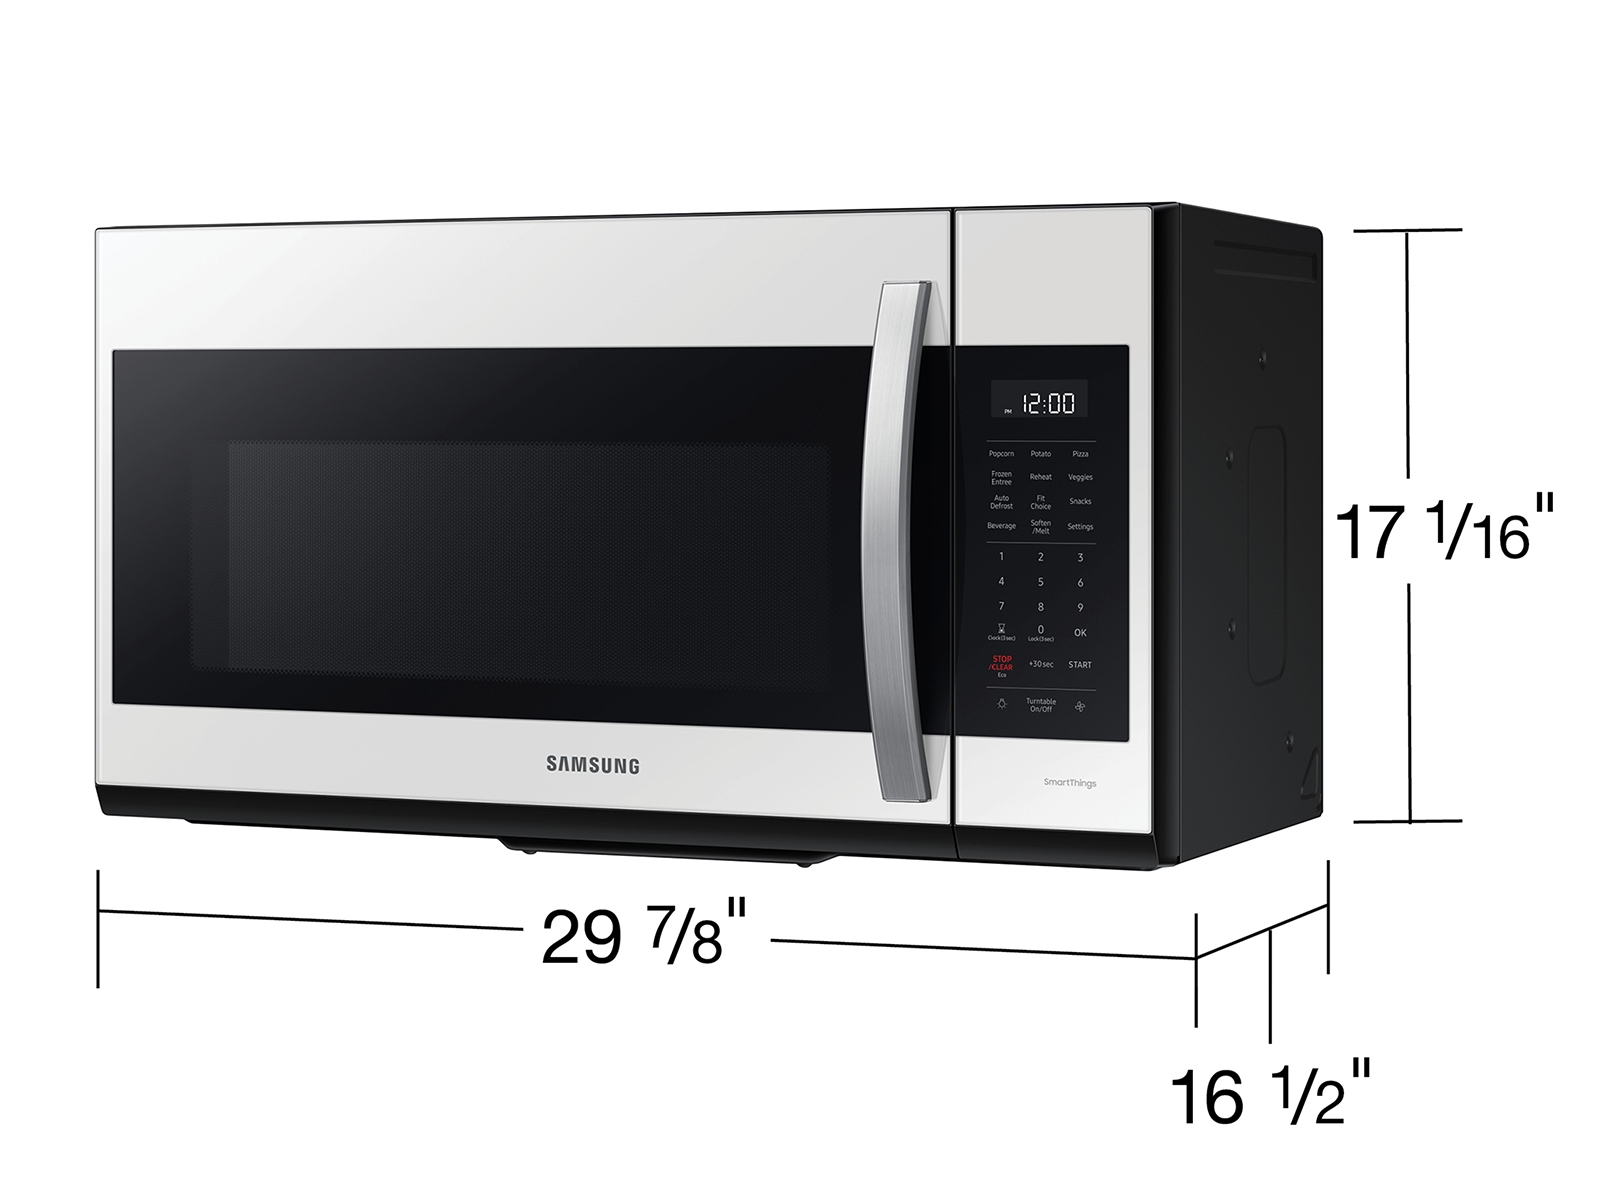 Thumbnail image of Bespoke Smart 1.9 cu. ft. Over-the-Range Microwave with Sensor Cook in White Glass